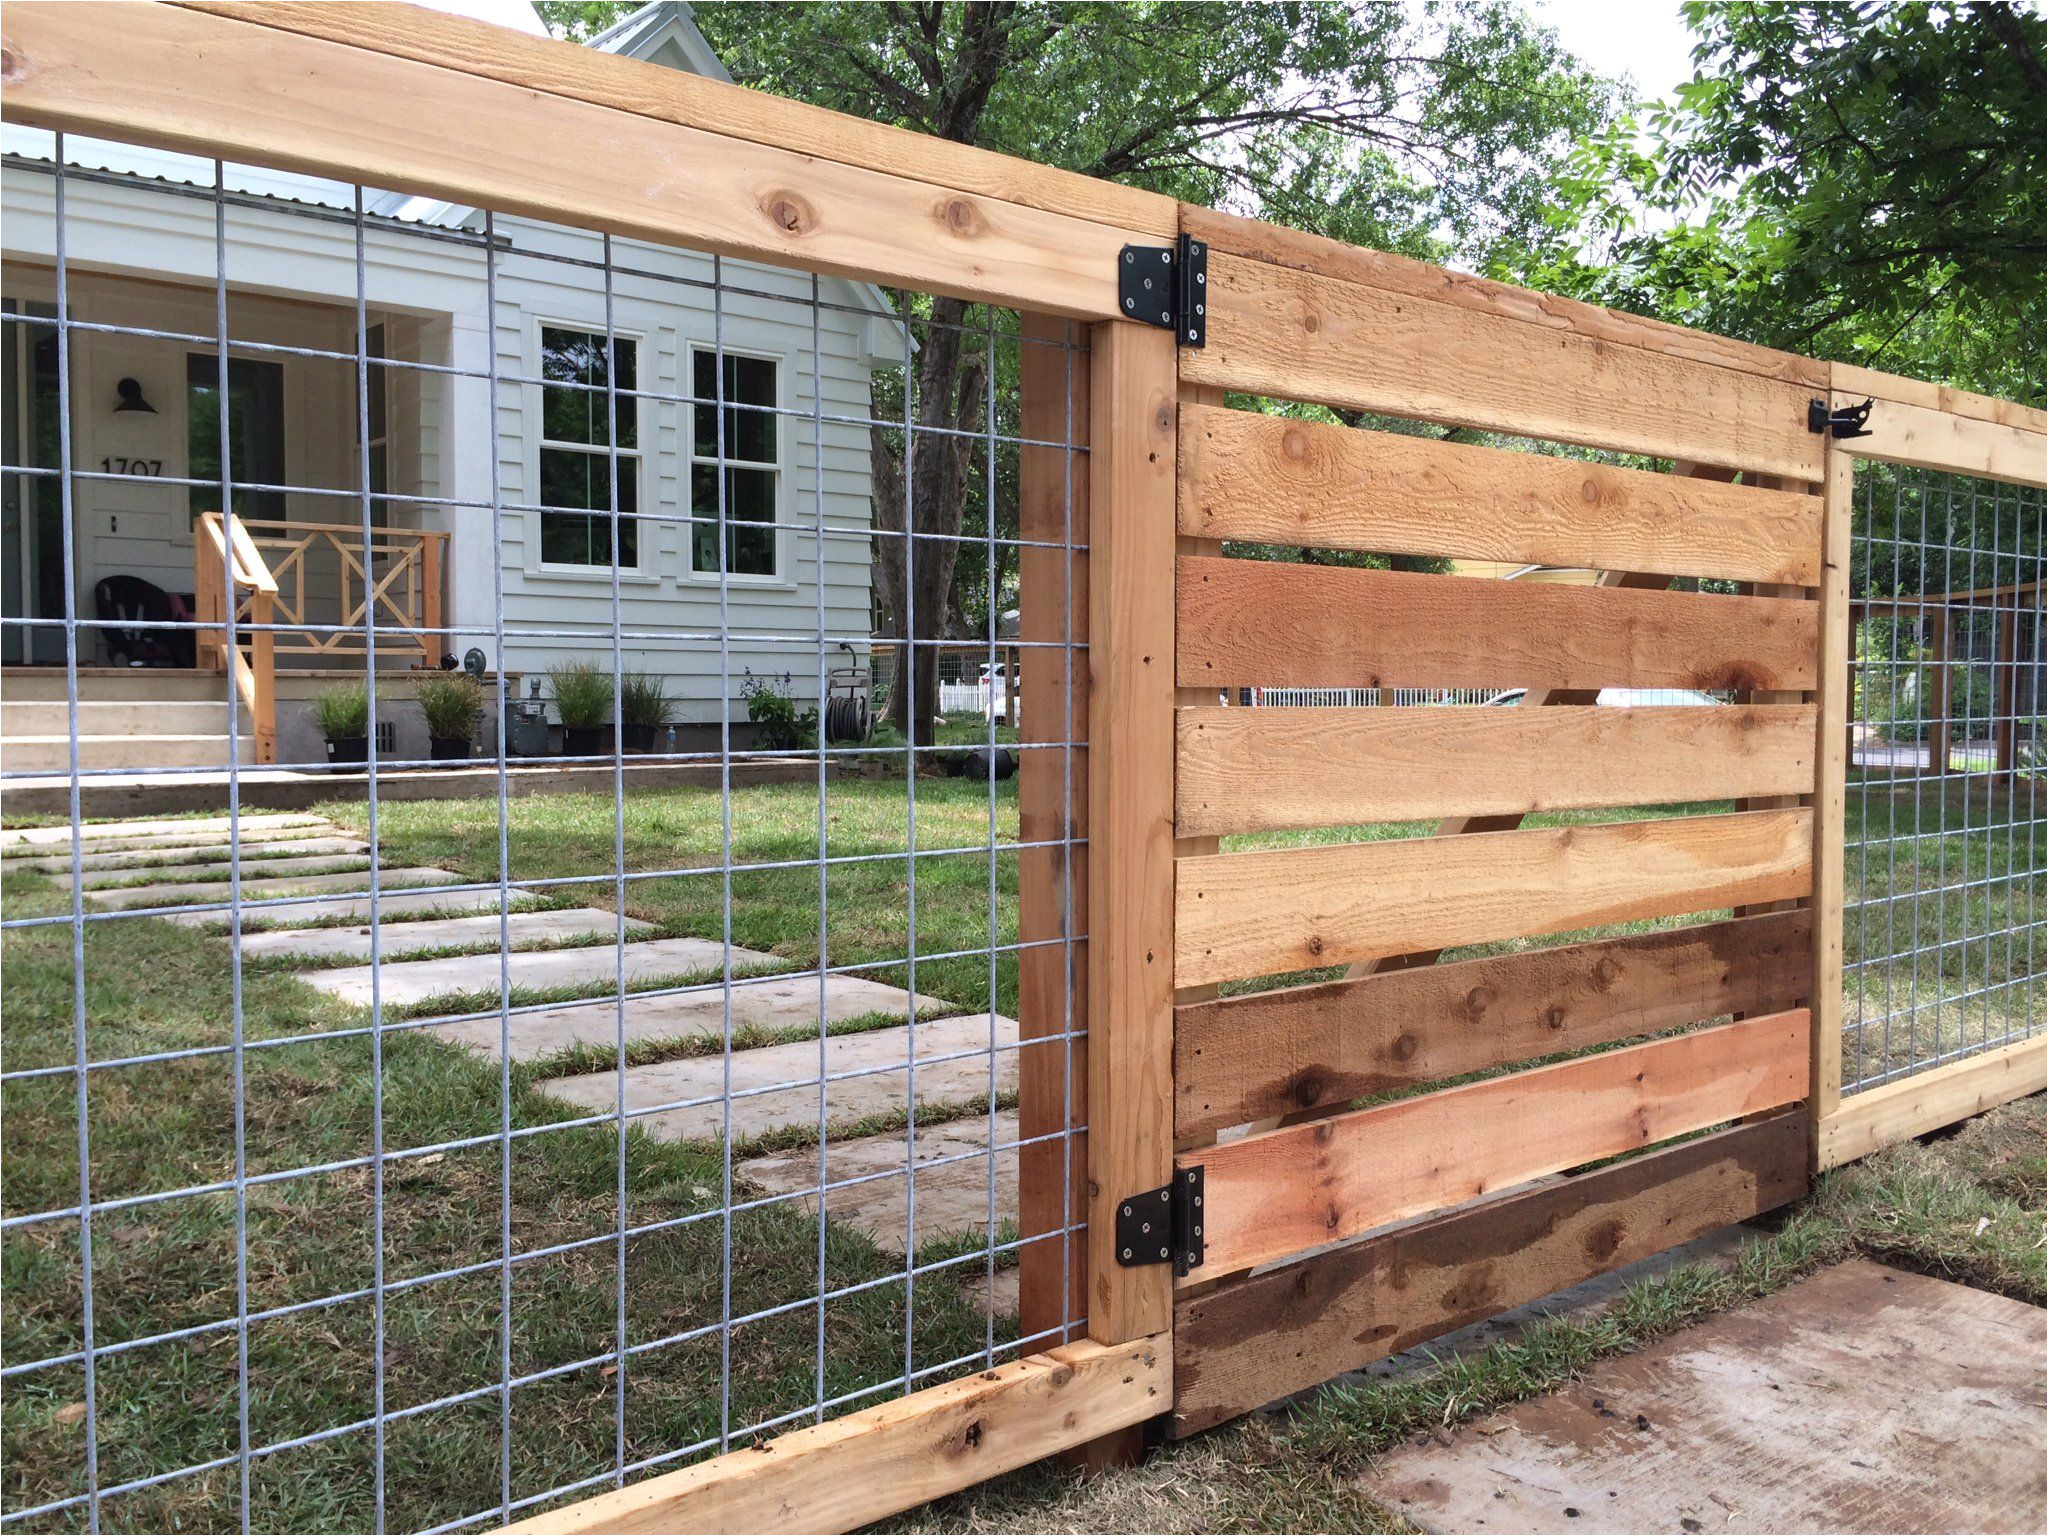 Diy Inexpensive Privacy Fence Ideas 17 Awesome Hog Wire Fence Design ...